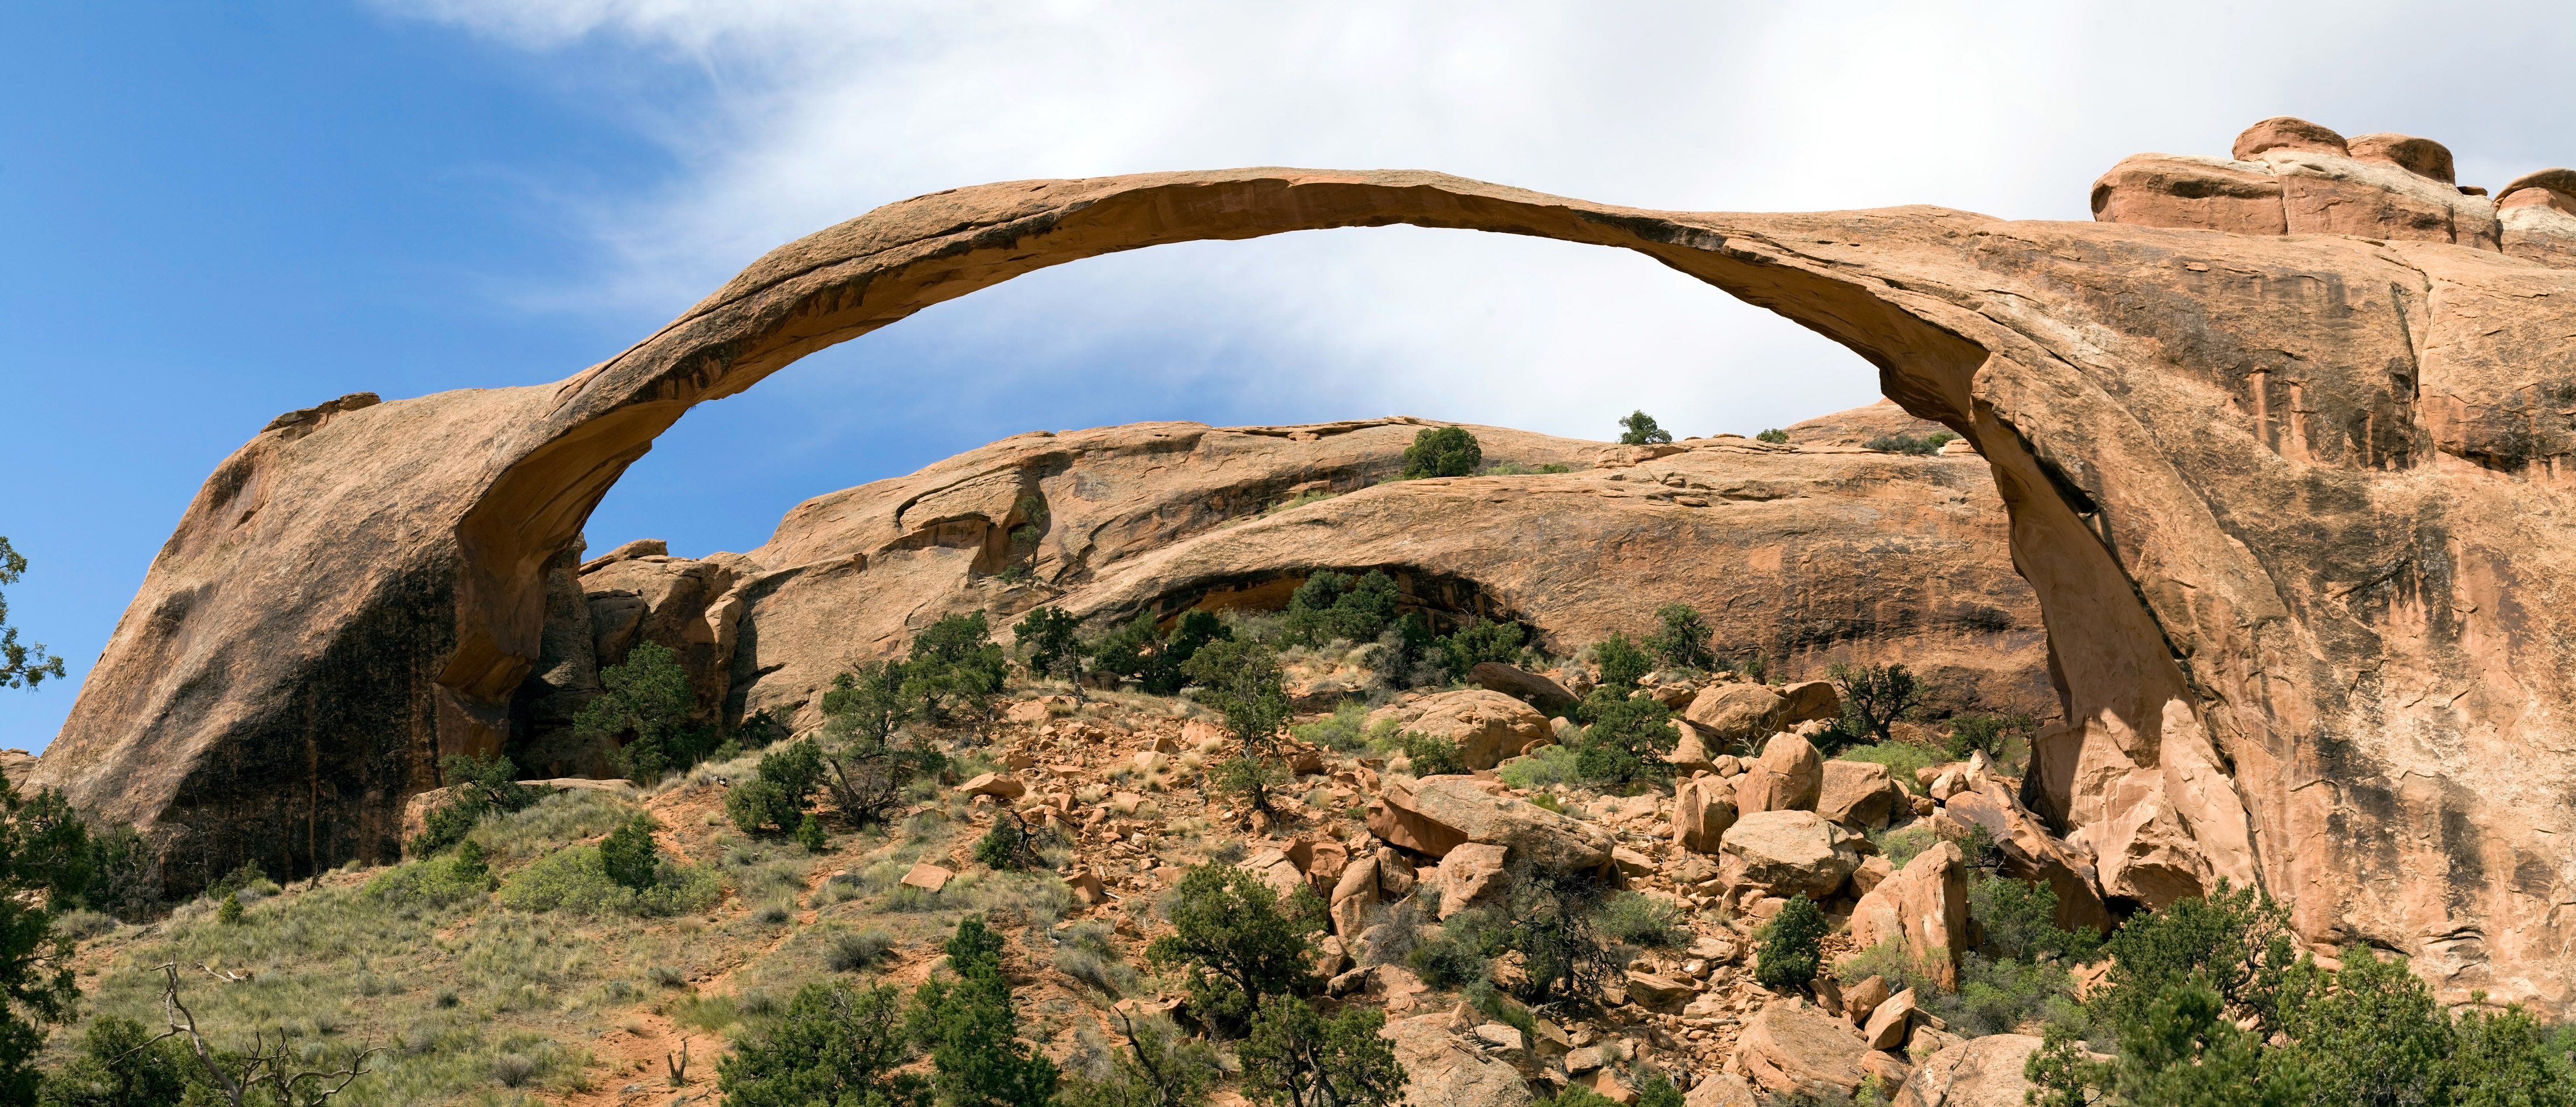 Images of Arch | 4544x1952